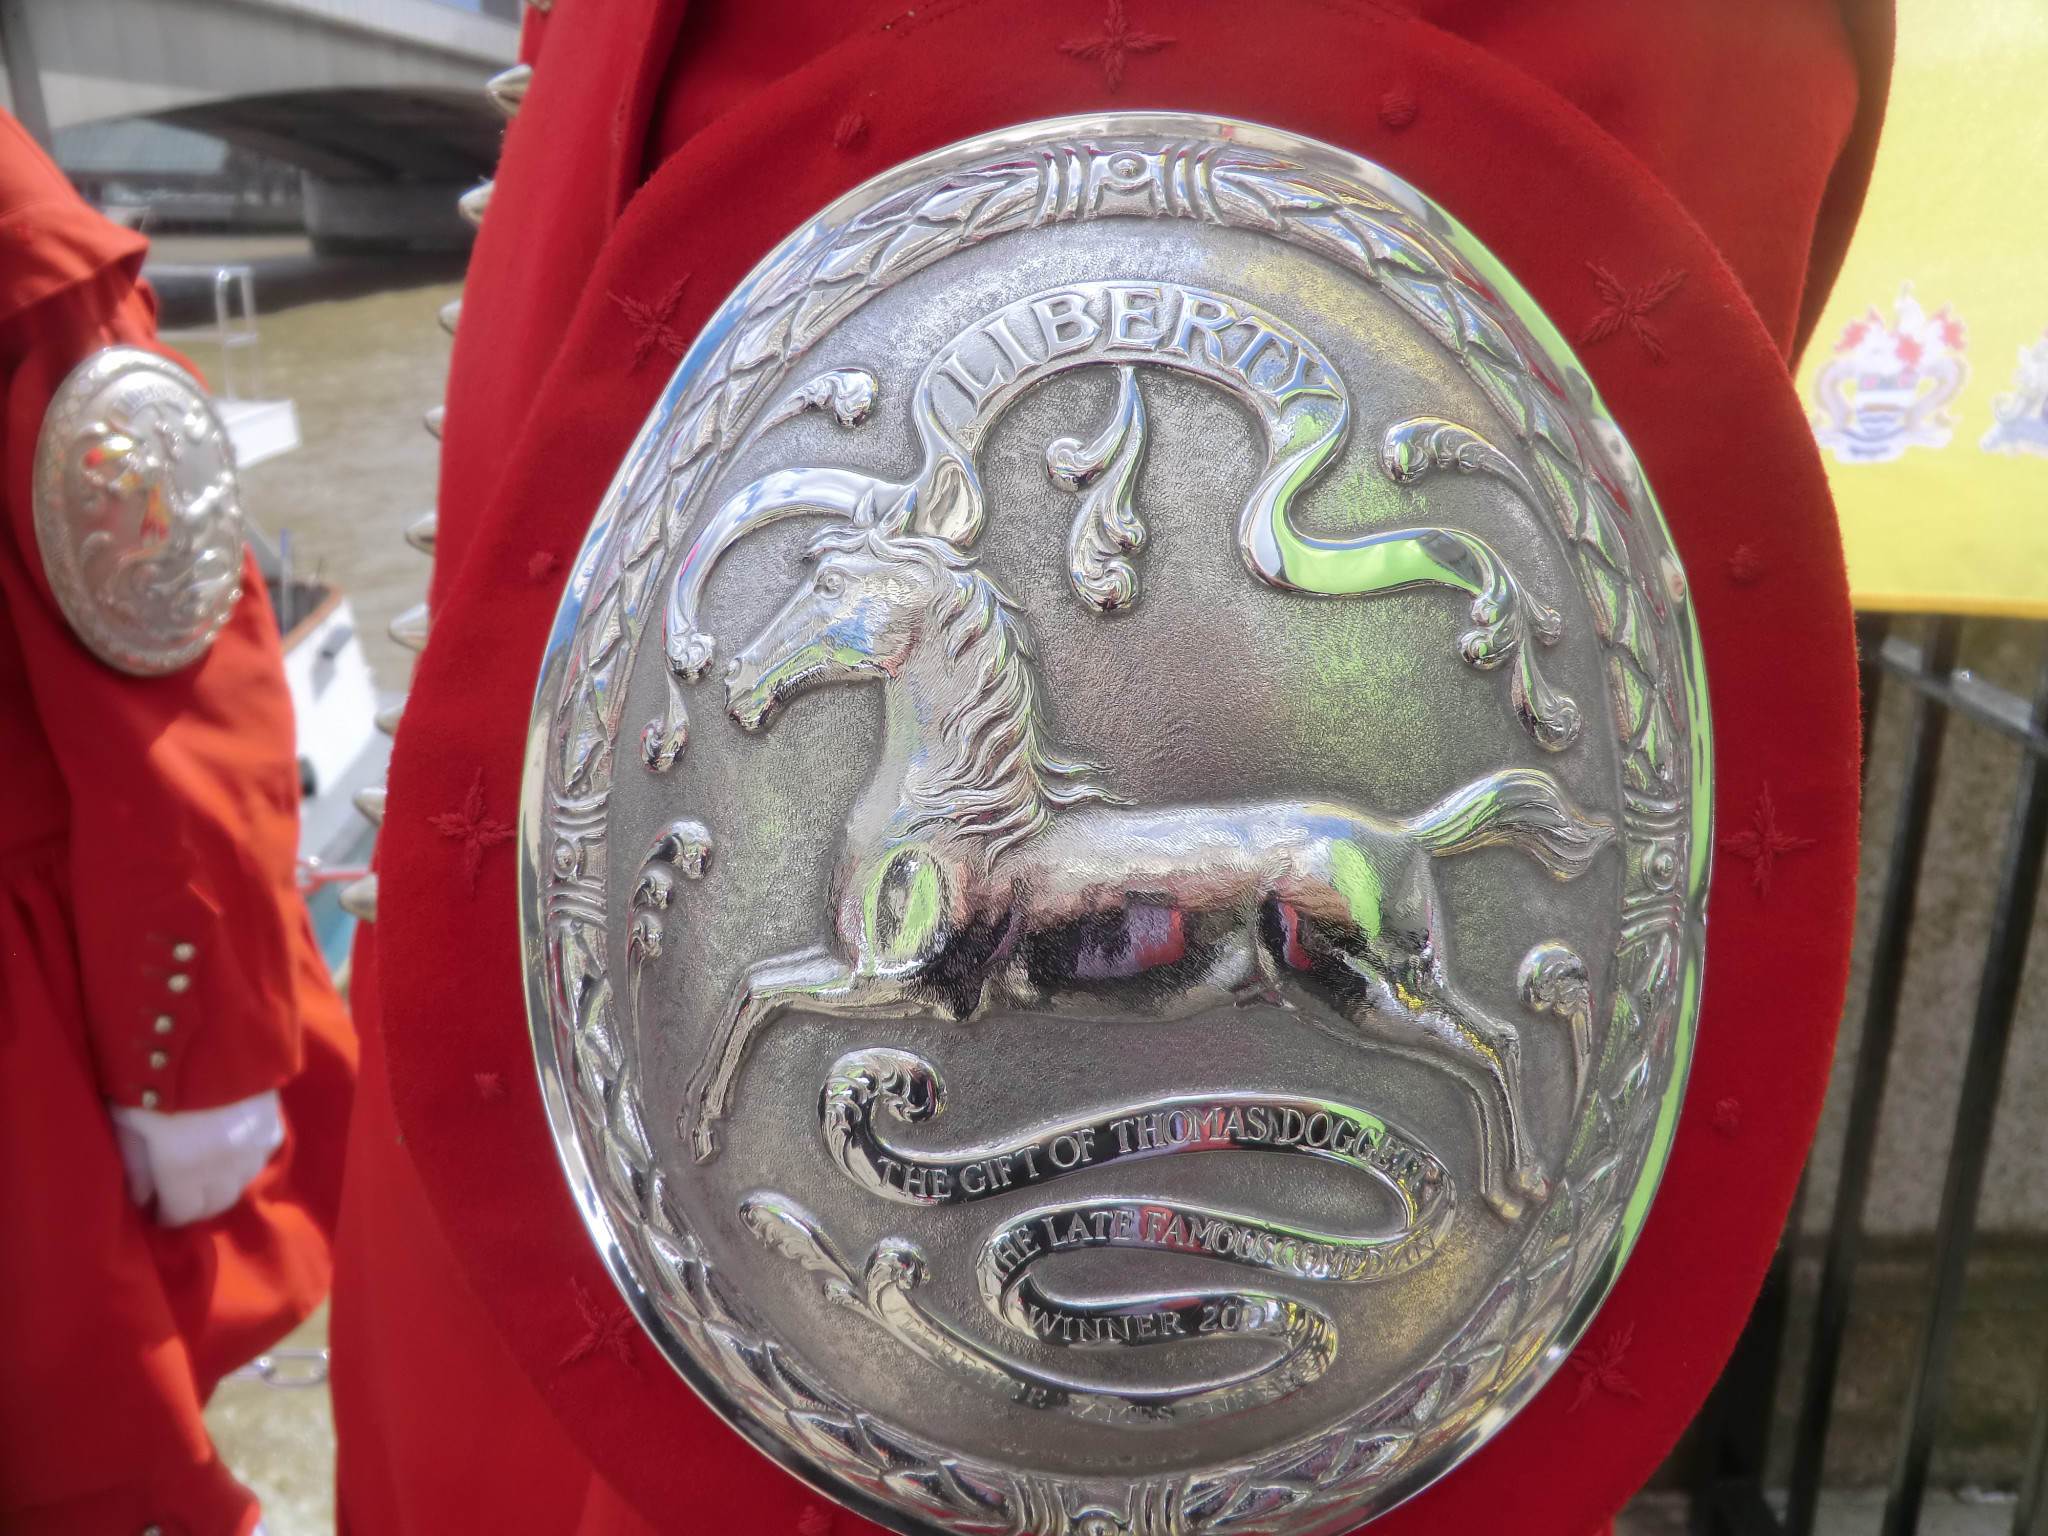 The red coat and silver badge awarded to the winner of Doggett's sculling race ©Philip Barker